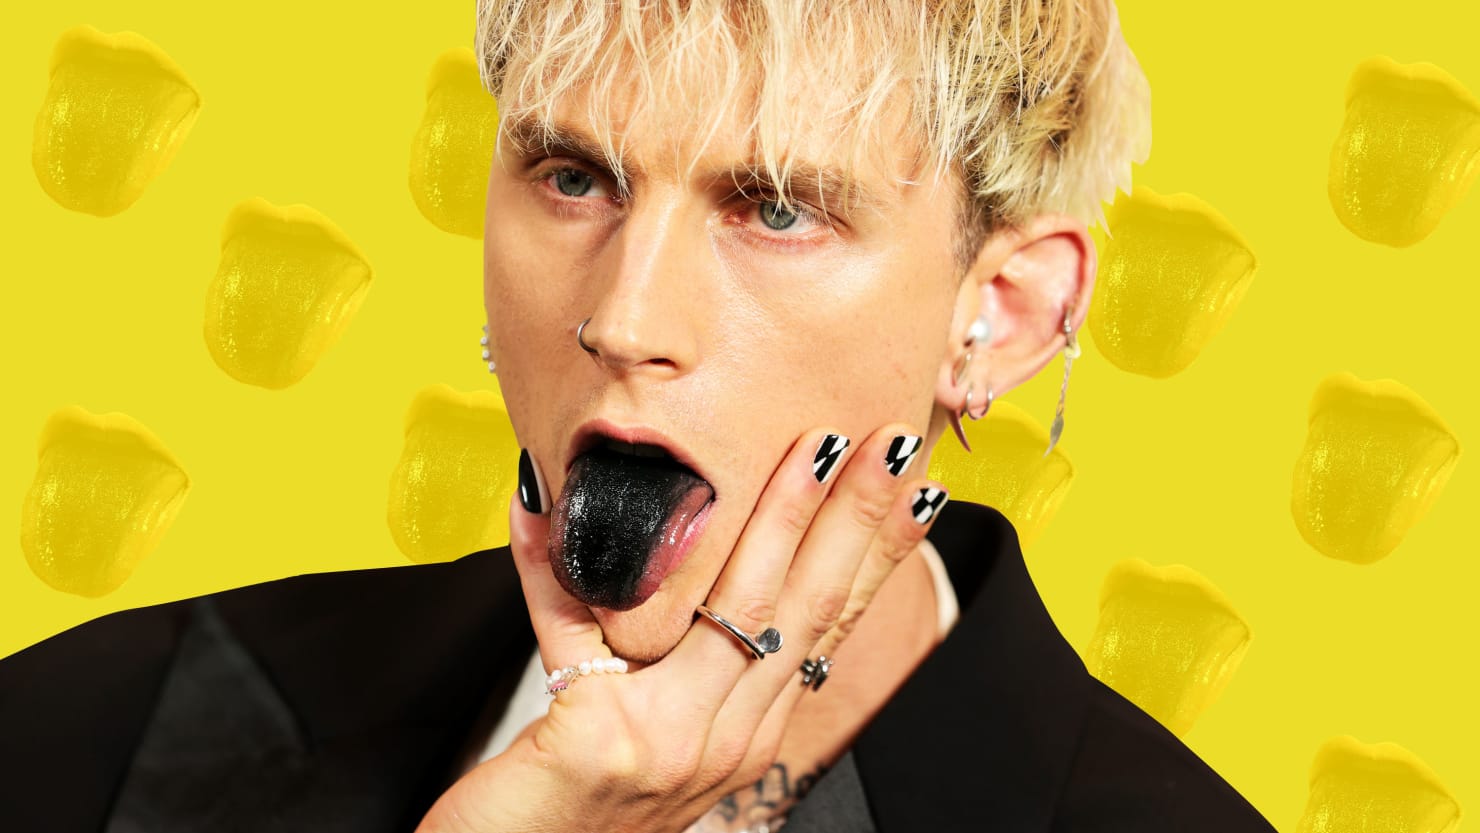 Why Is Machine Gun Kelly a Thing - The Daily Beast